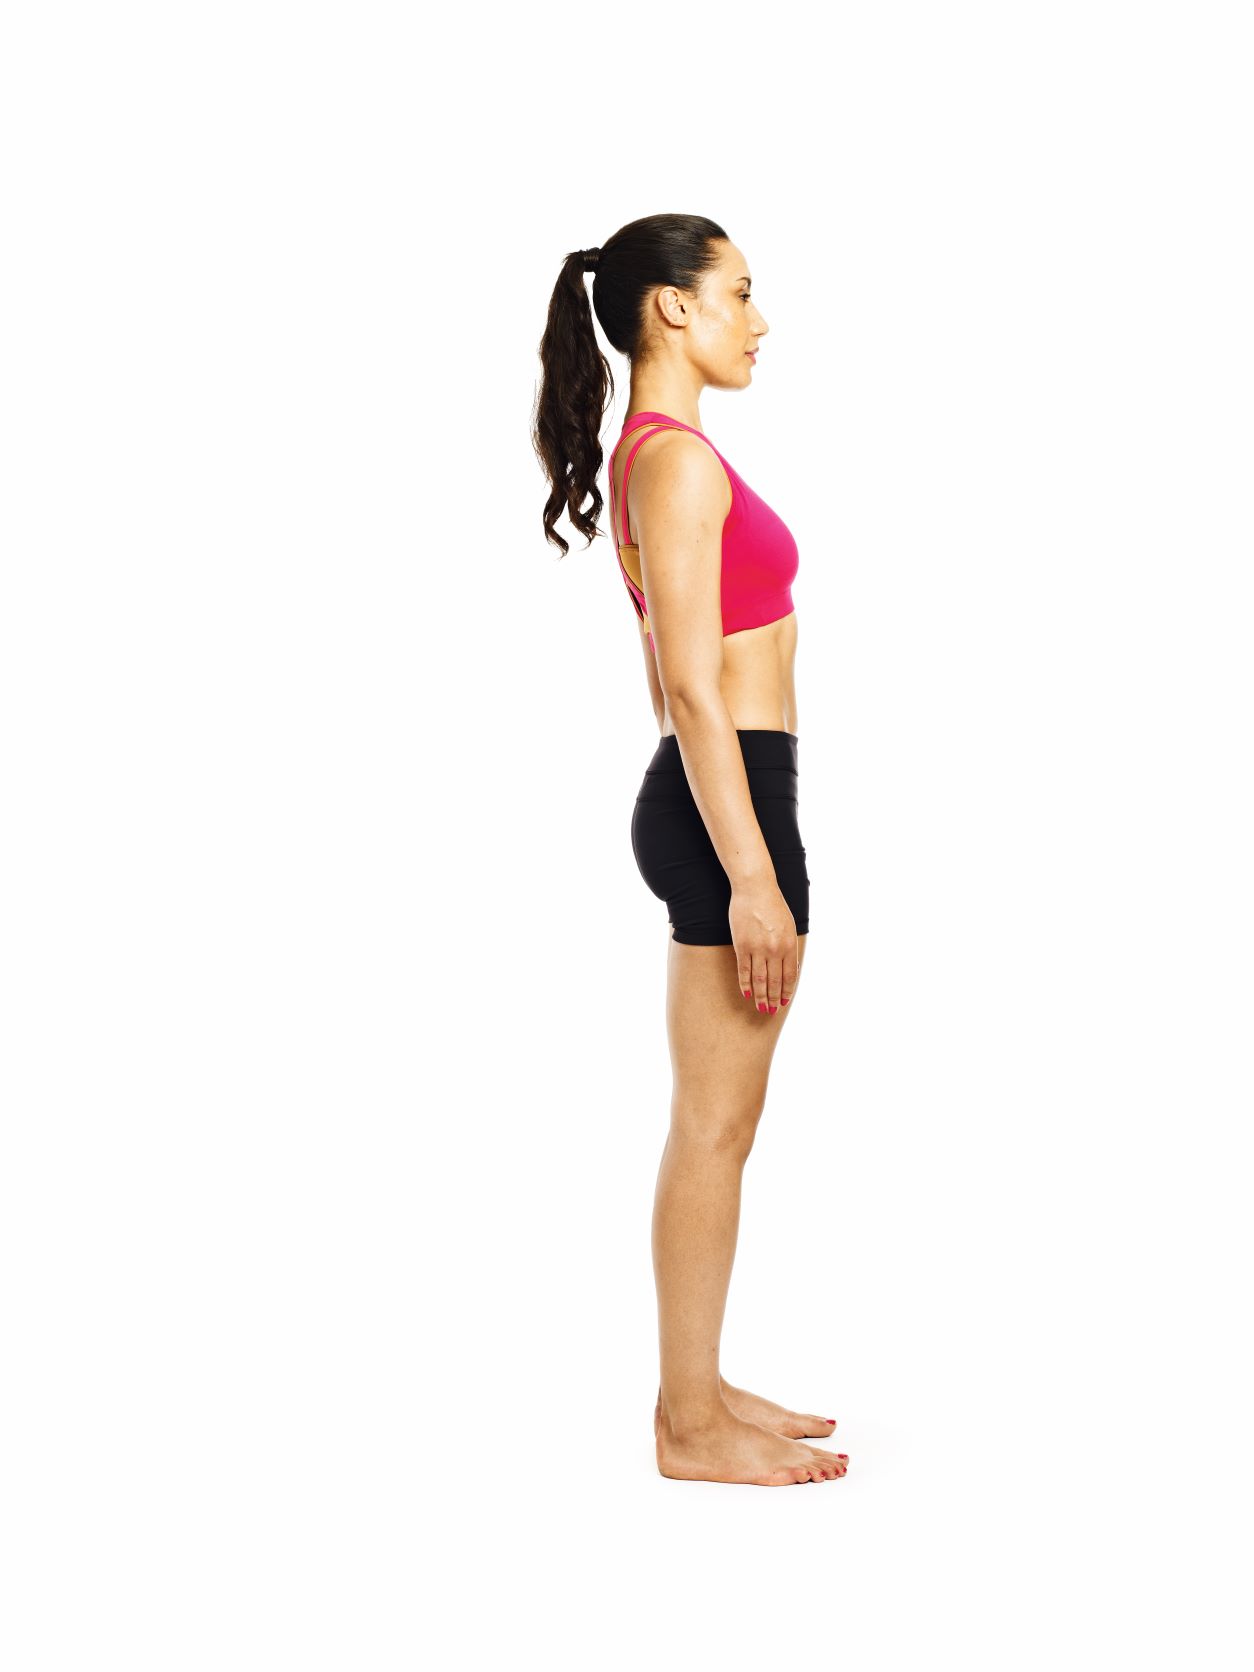 runner's lunge 10 minute yoga glute workout